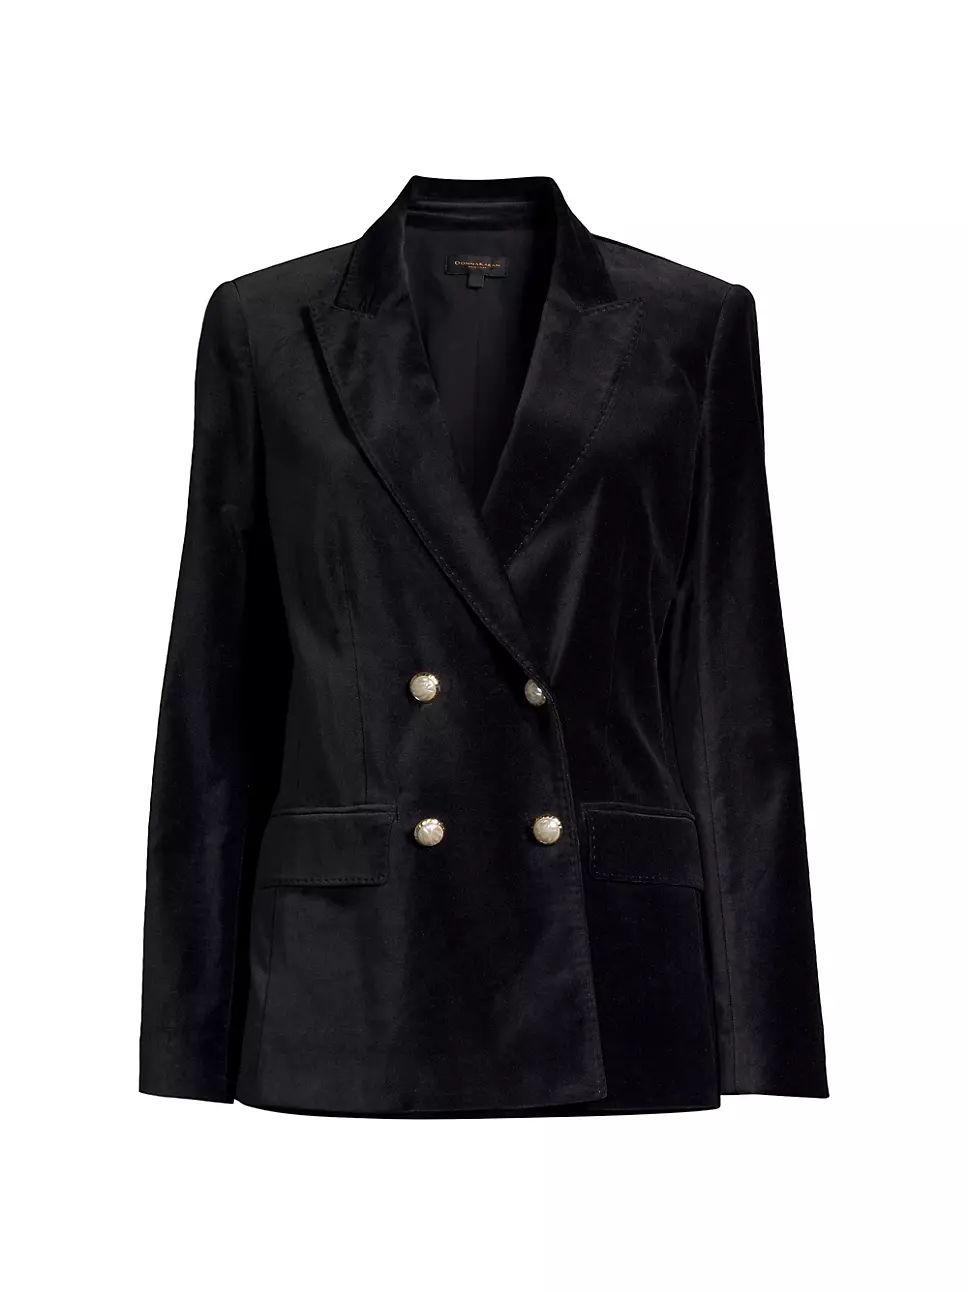 Main Event Double-Breasted Velvet Jacket | Saks Fifth Avenue